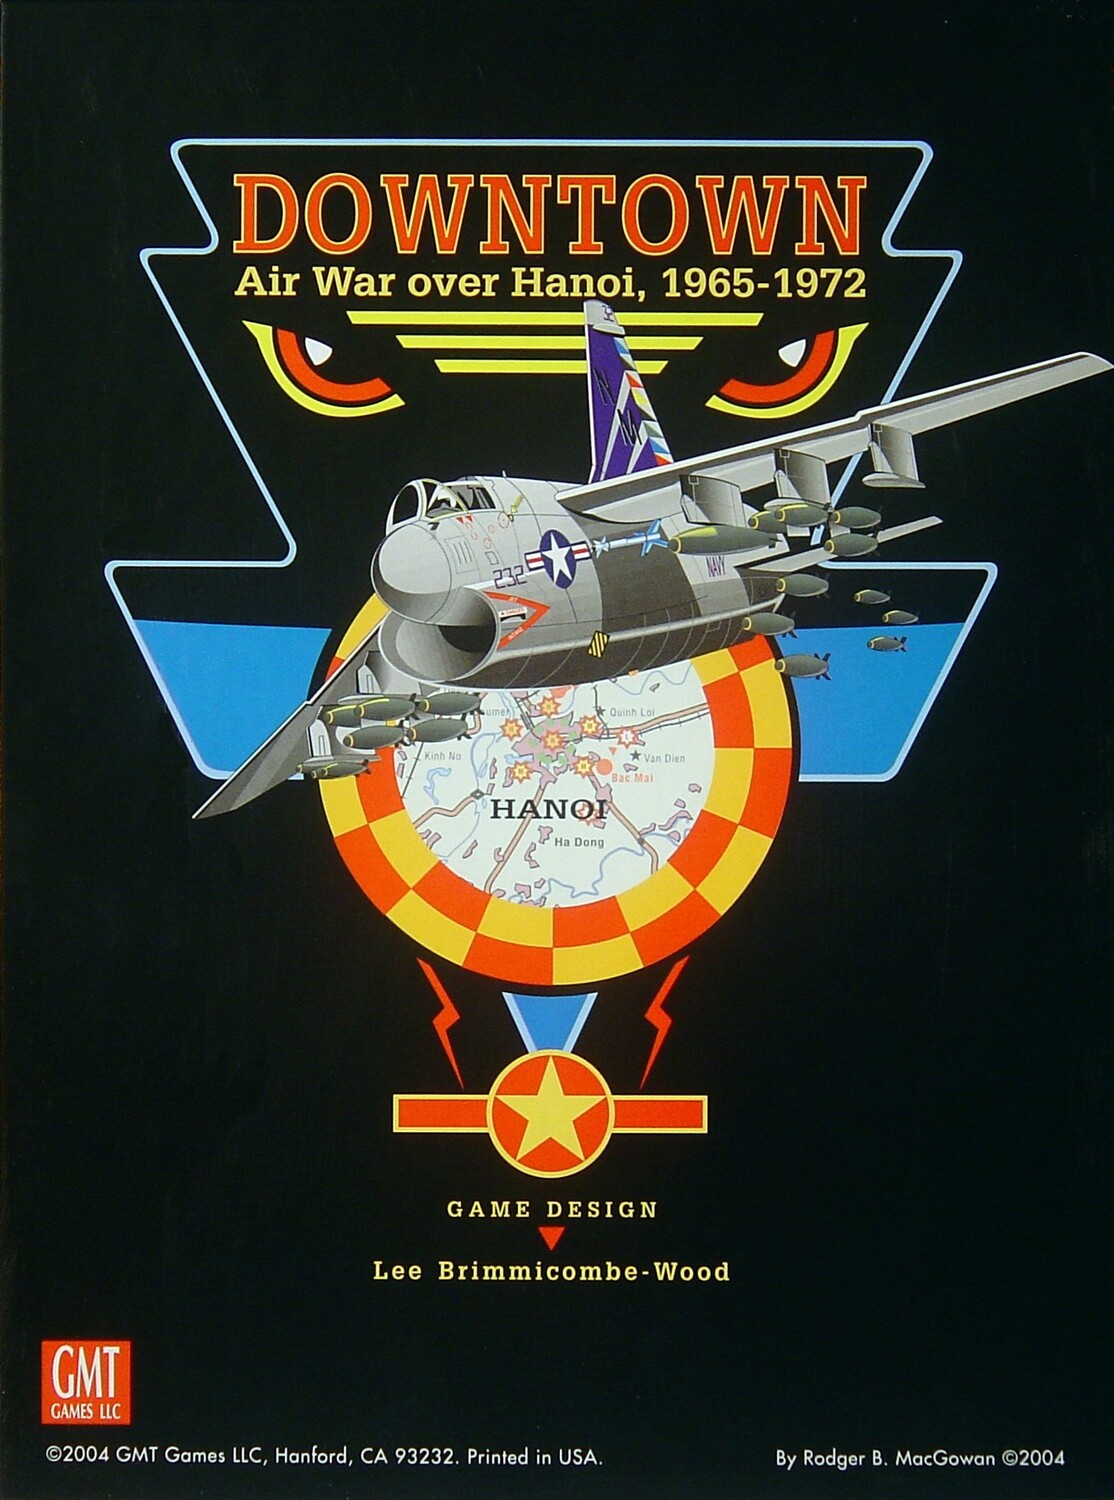 Downtown Poster